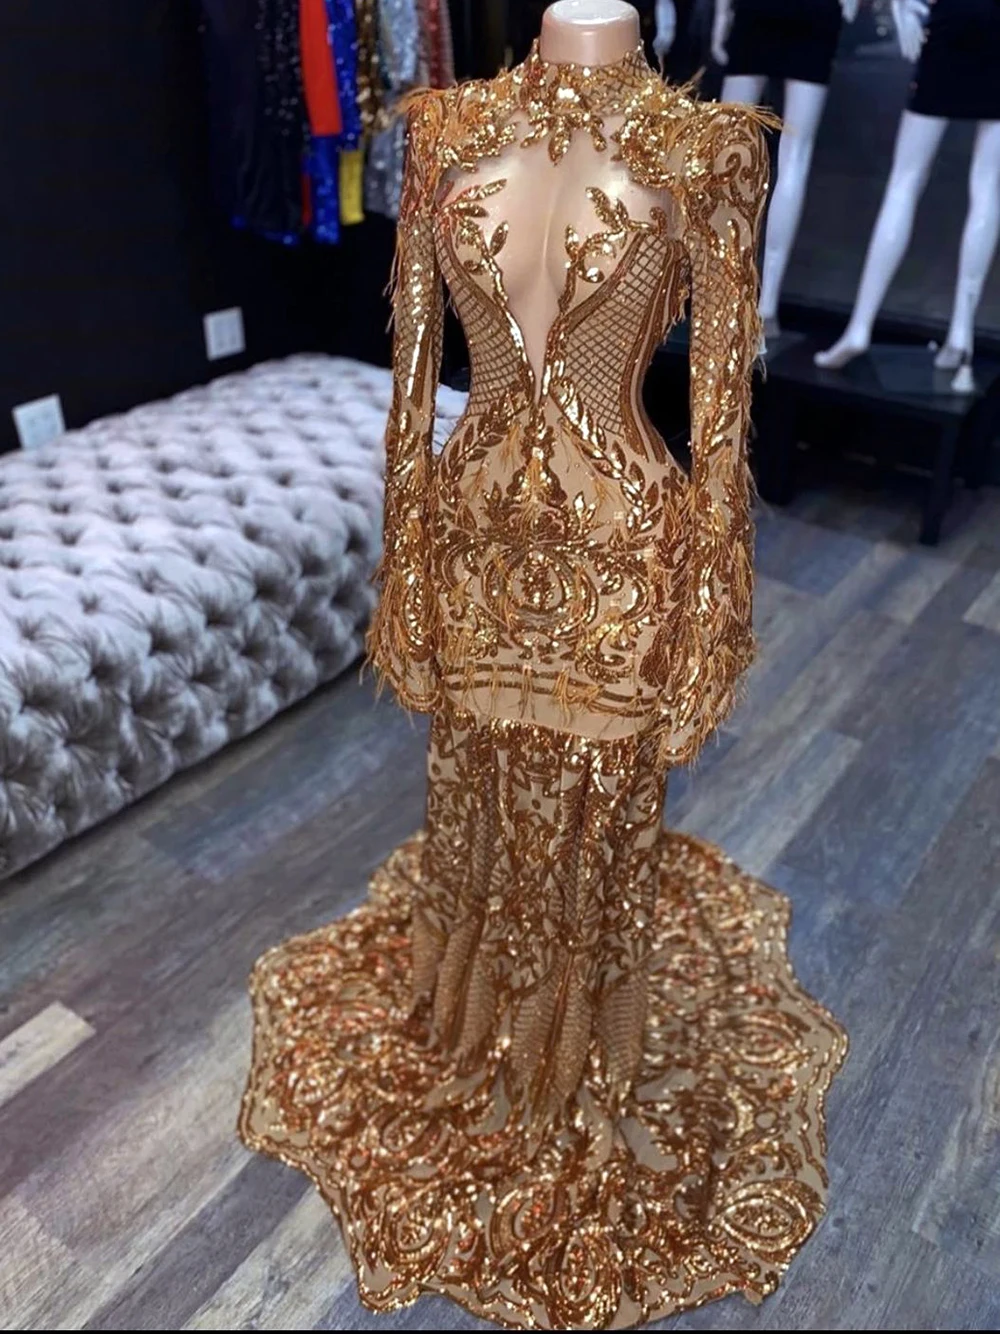 

Sparkly Gold Sequin Long Mermaid Prom Dresses 2023 High Neck Full Sleeve See Through African Women Black Girls Evening Gowns